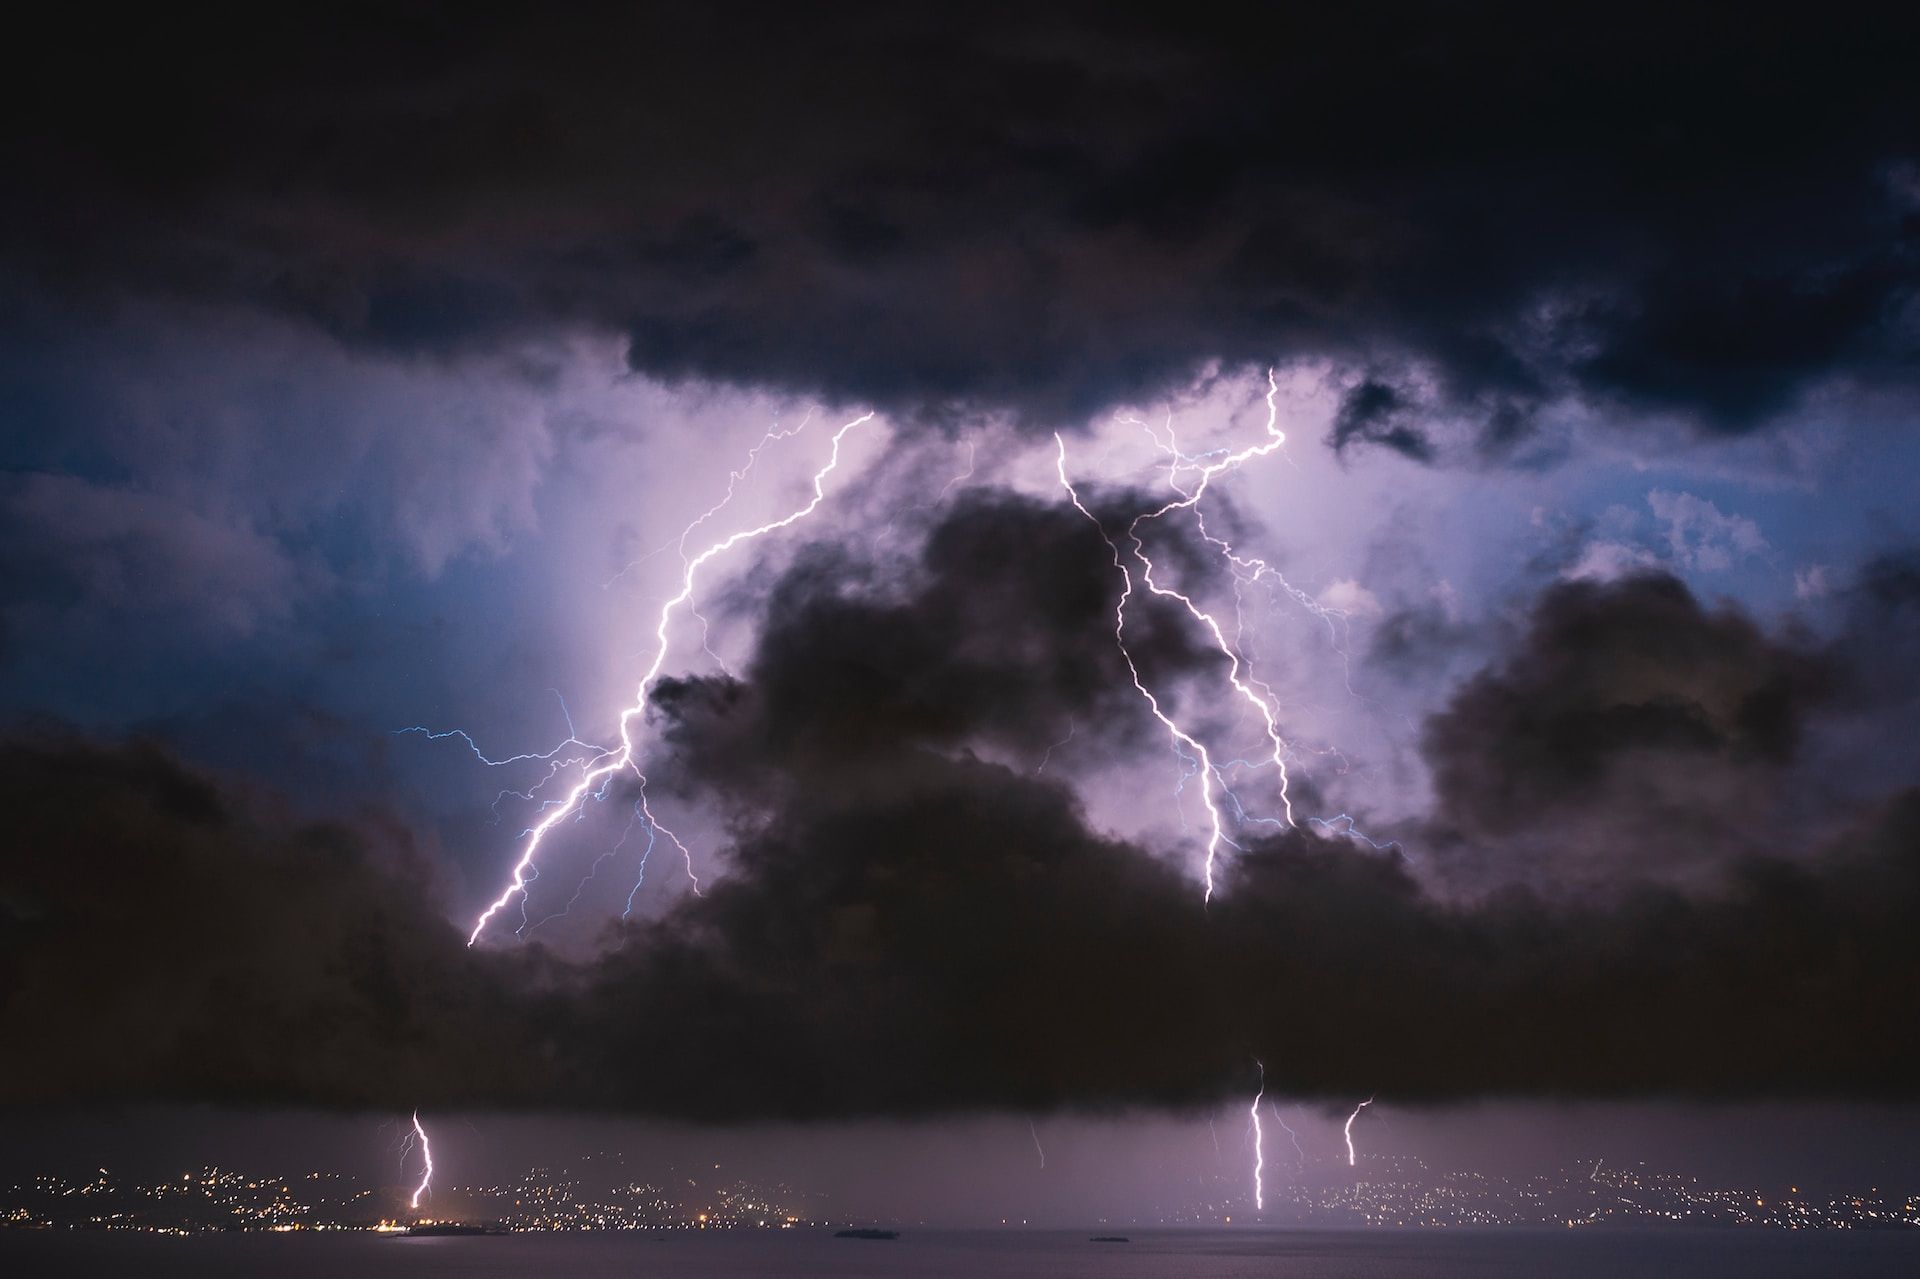 A lightning storm above the ocean at night